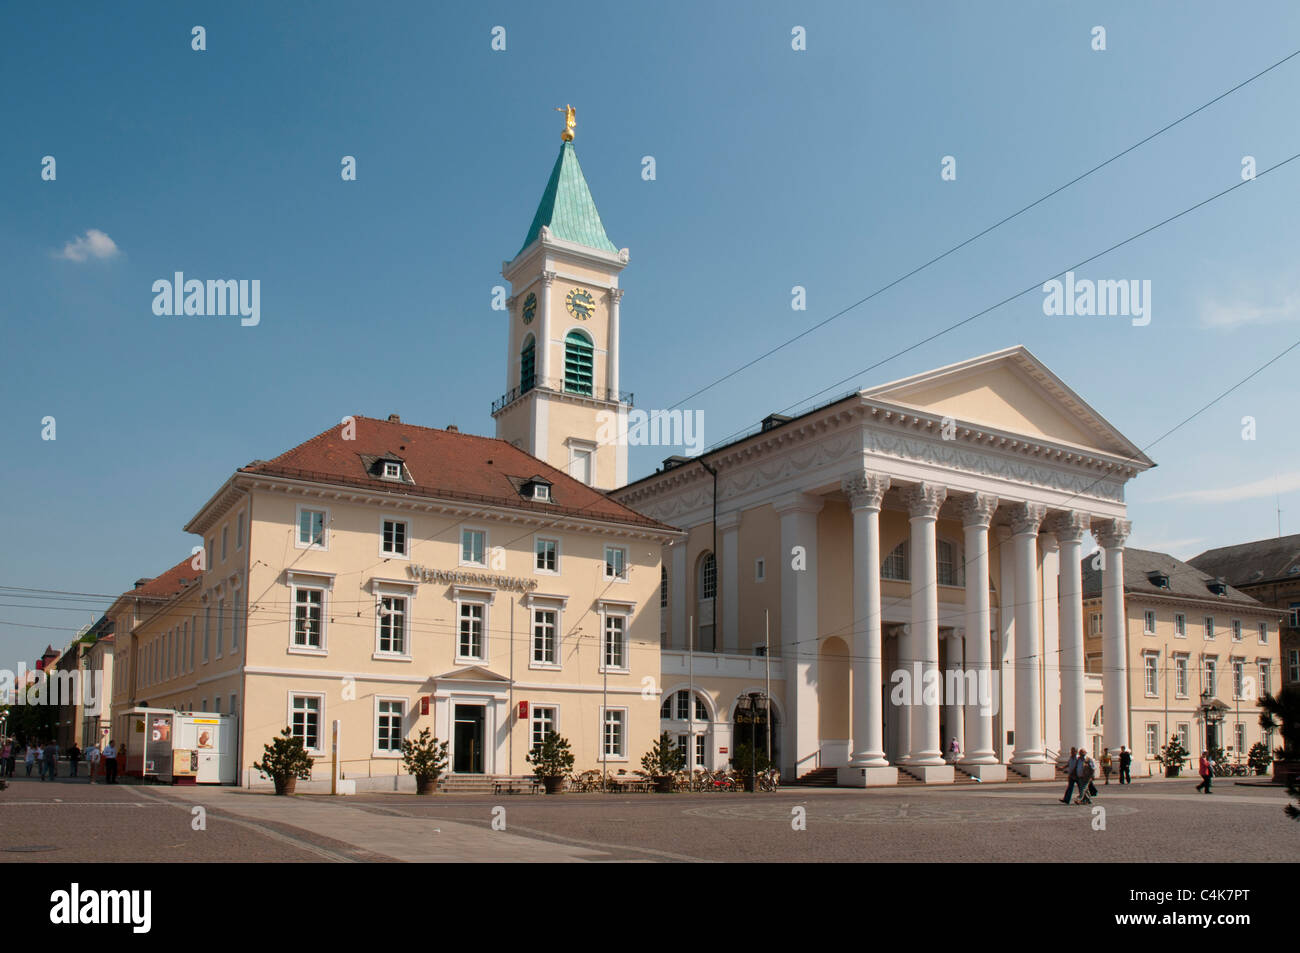 Market square with Protestant church, Karlsruhe, Baden-Wuerttemberg, Germany, Europe Stock Photo